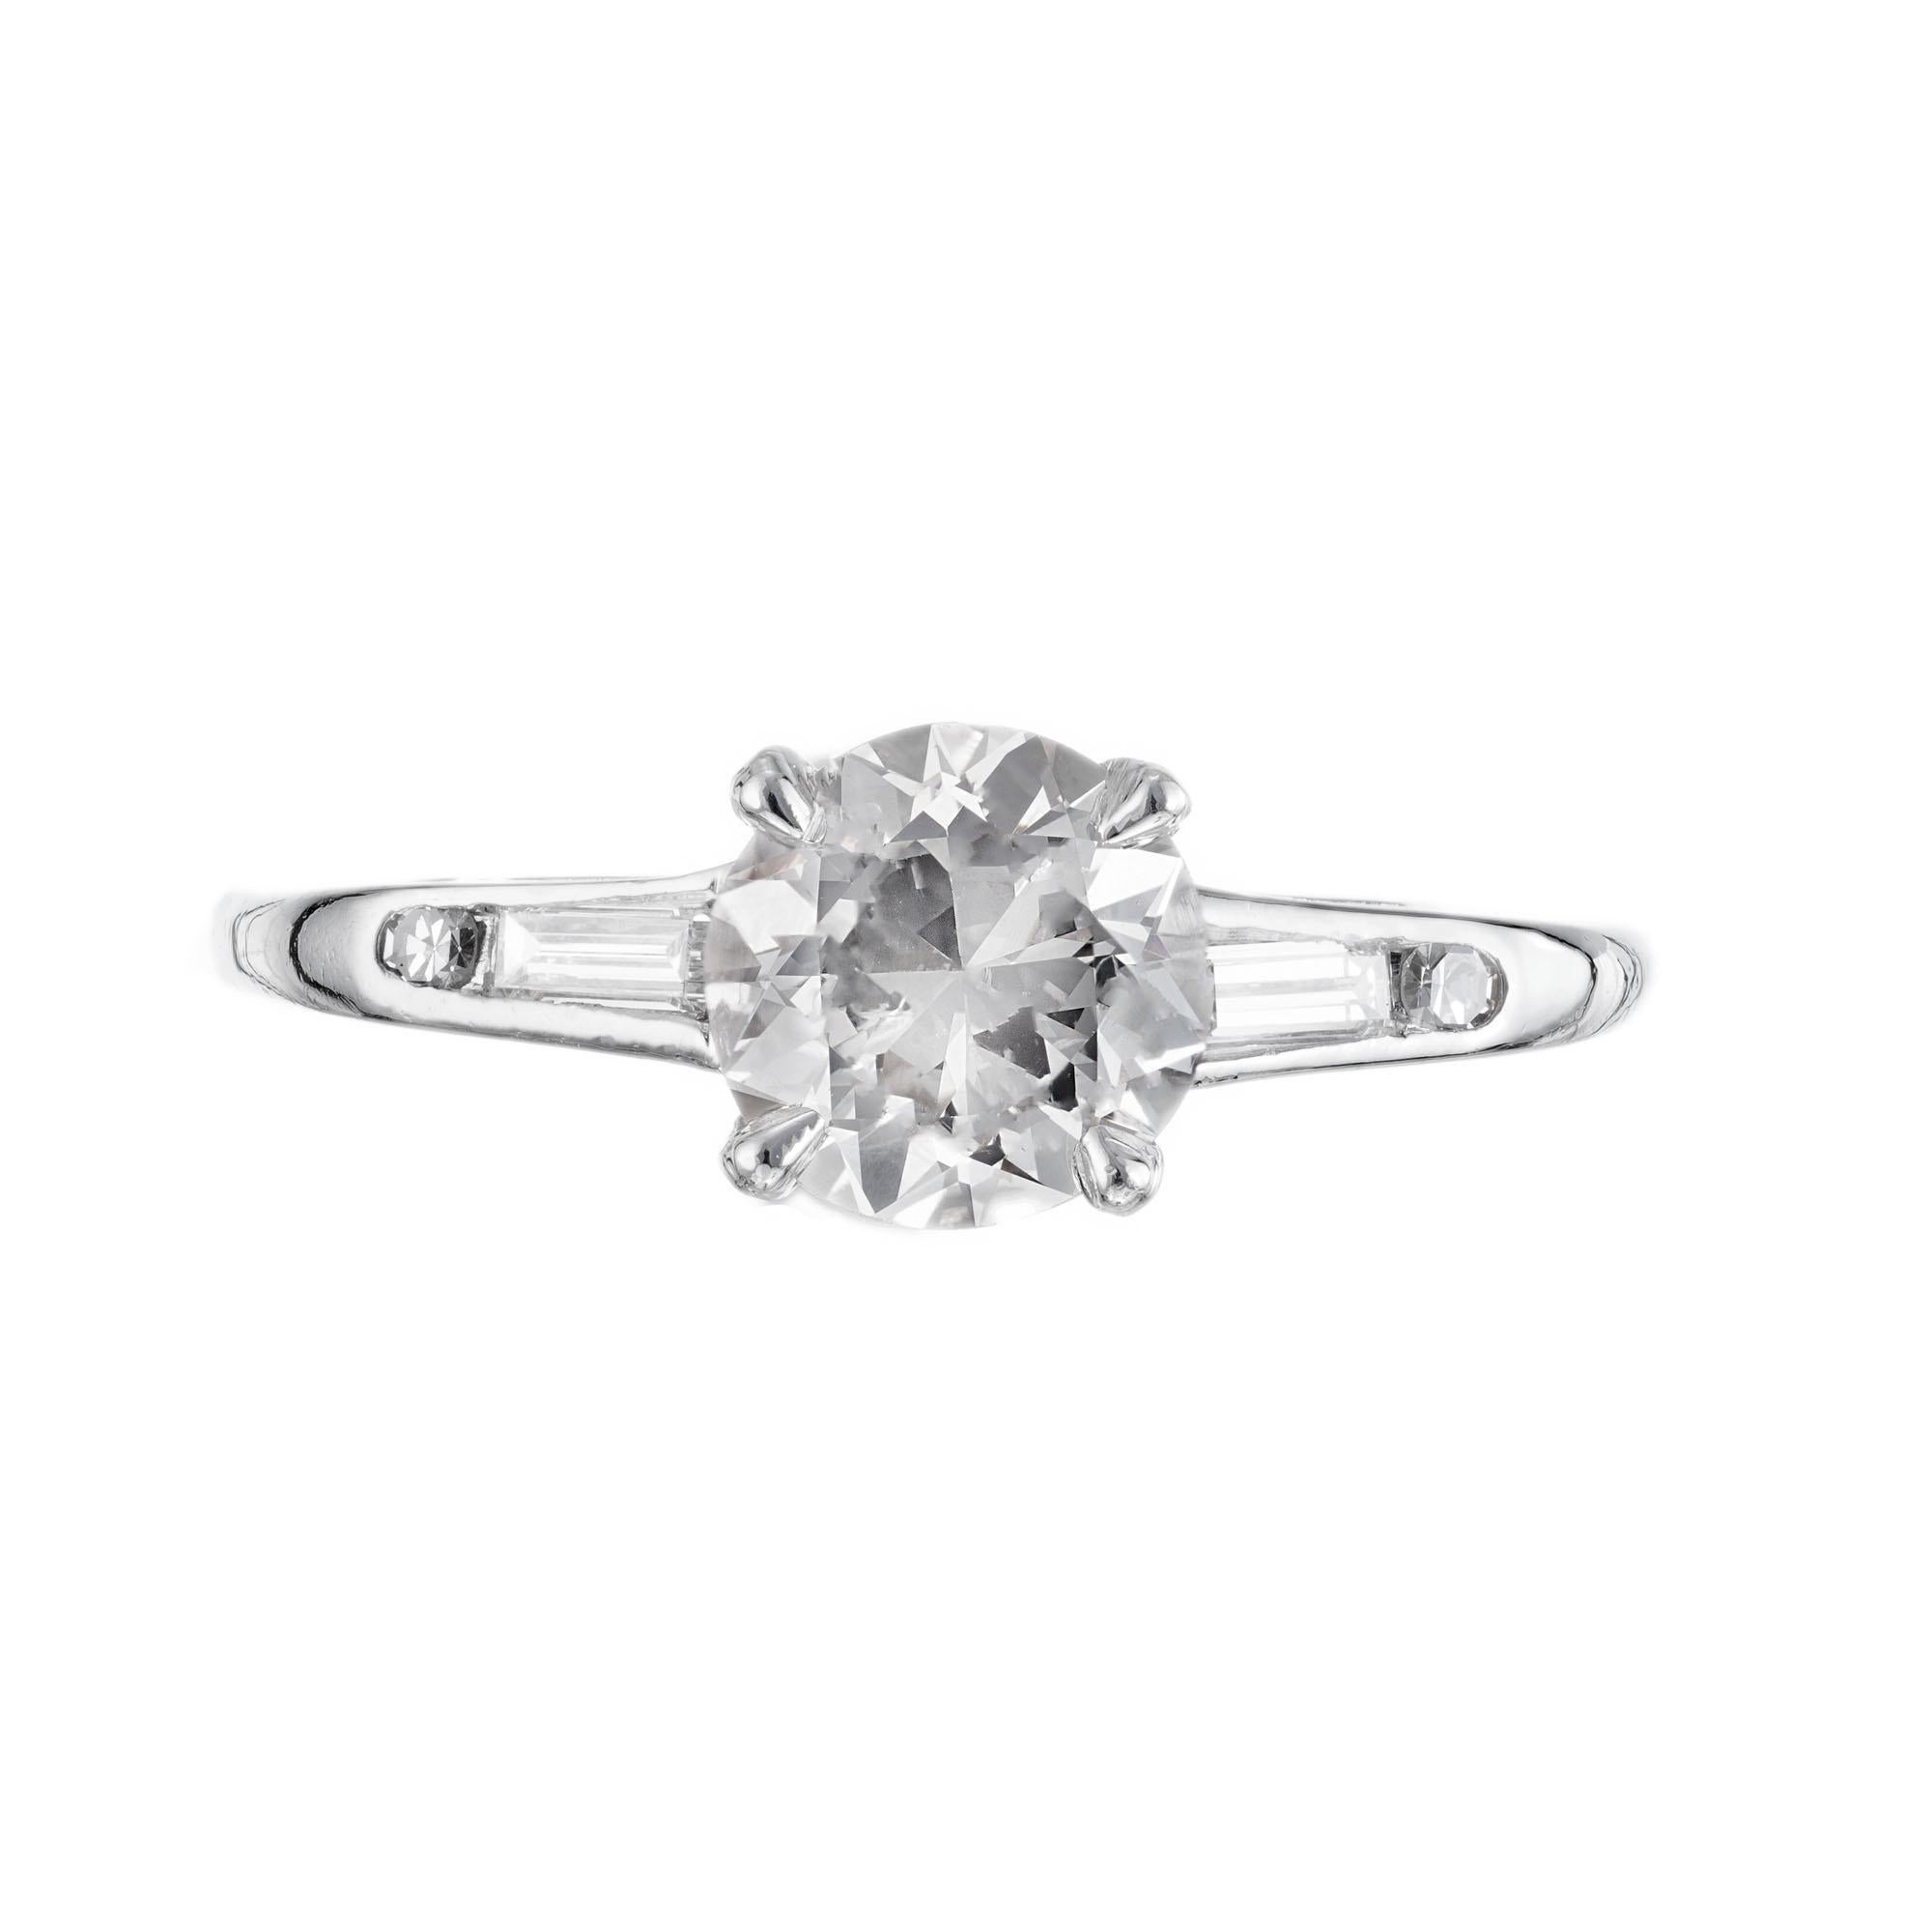 GIA certified Natural faint brown round diamond engagement ring. Platinum setting with two round and two baguette accent diamonds.  

1 diamond approx. total weight 1.11cts, 6,50 x 6.69 x 4.19mm. Eye clean. SI2 clarity. 63.5% depth. 59% table. GIA